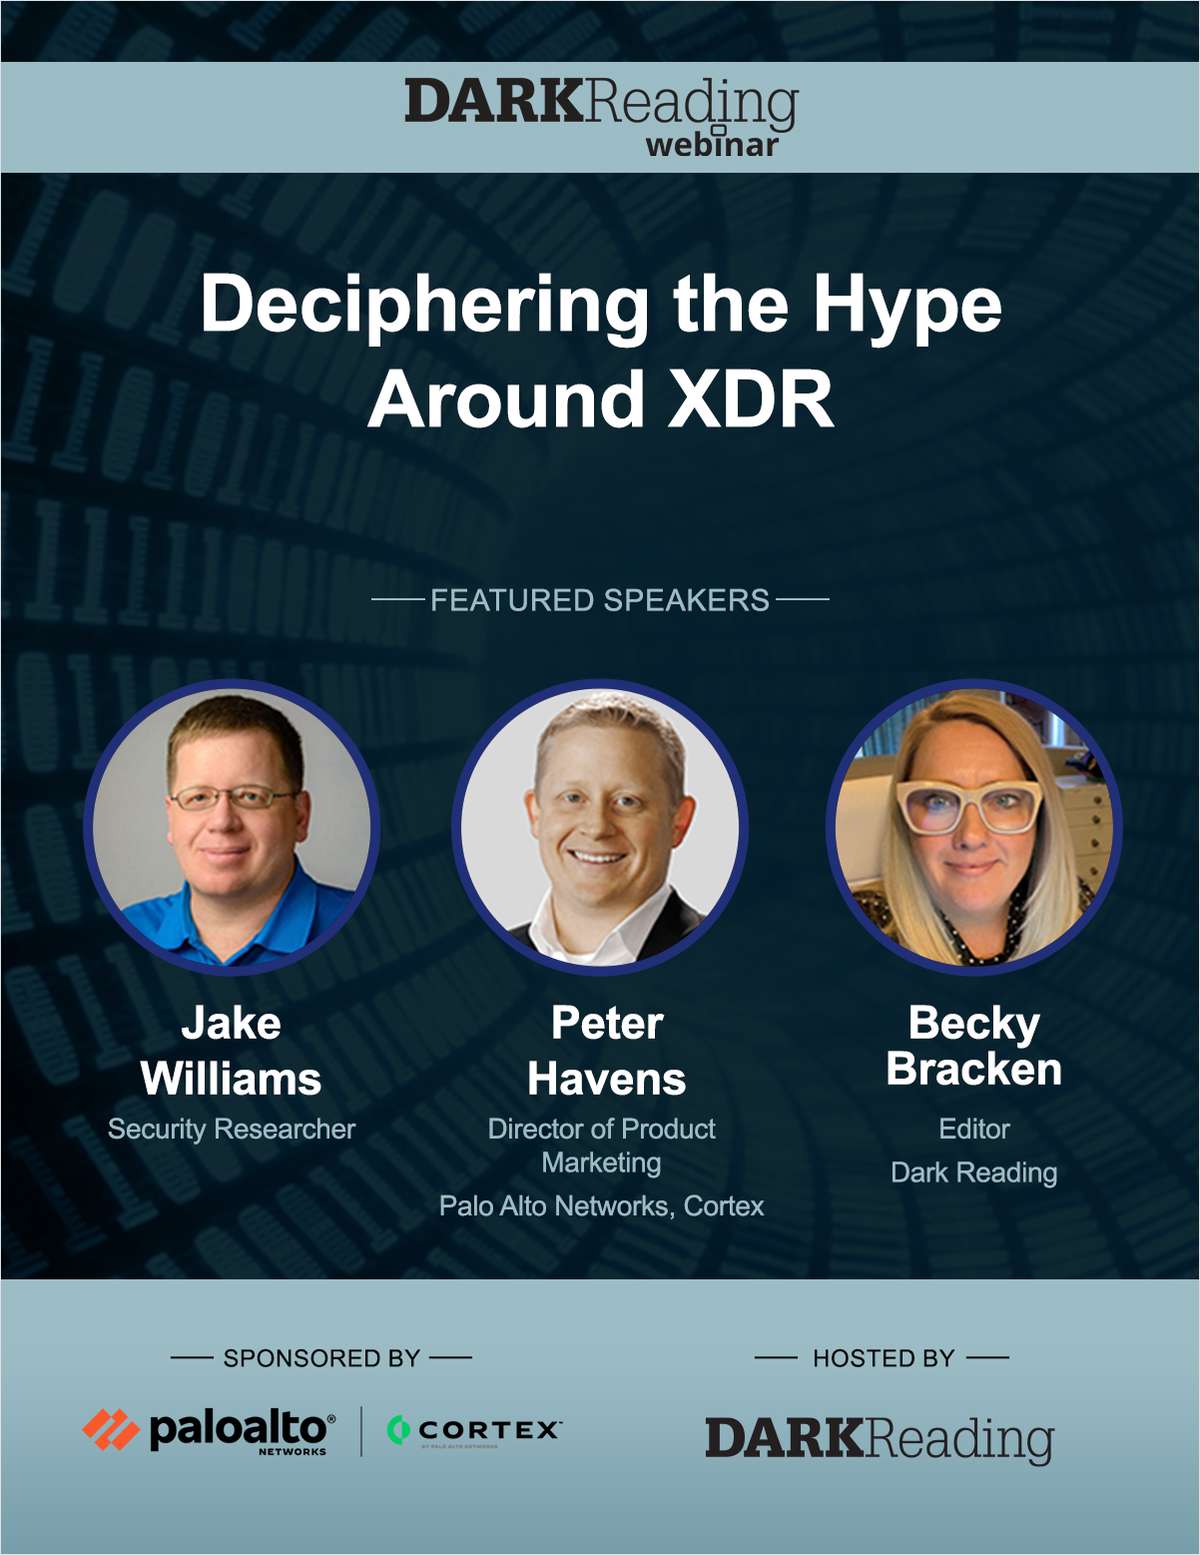 Deciphering the Hype Around XDR